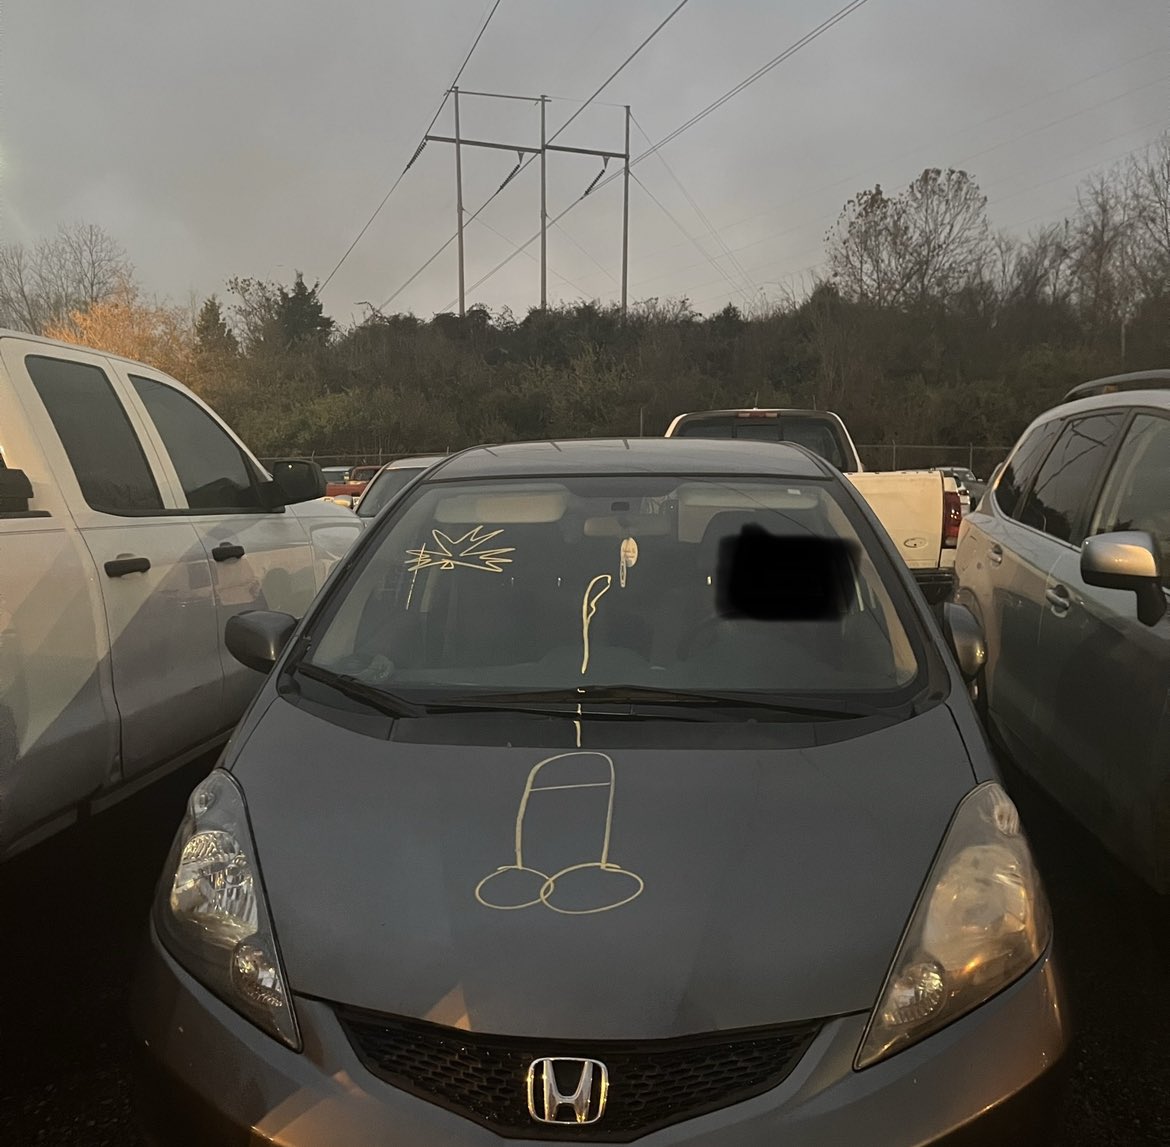 i’m your designated driver but what happens when someone steals my car just to draw a dick